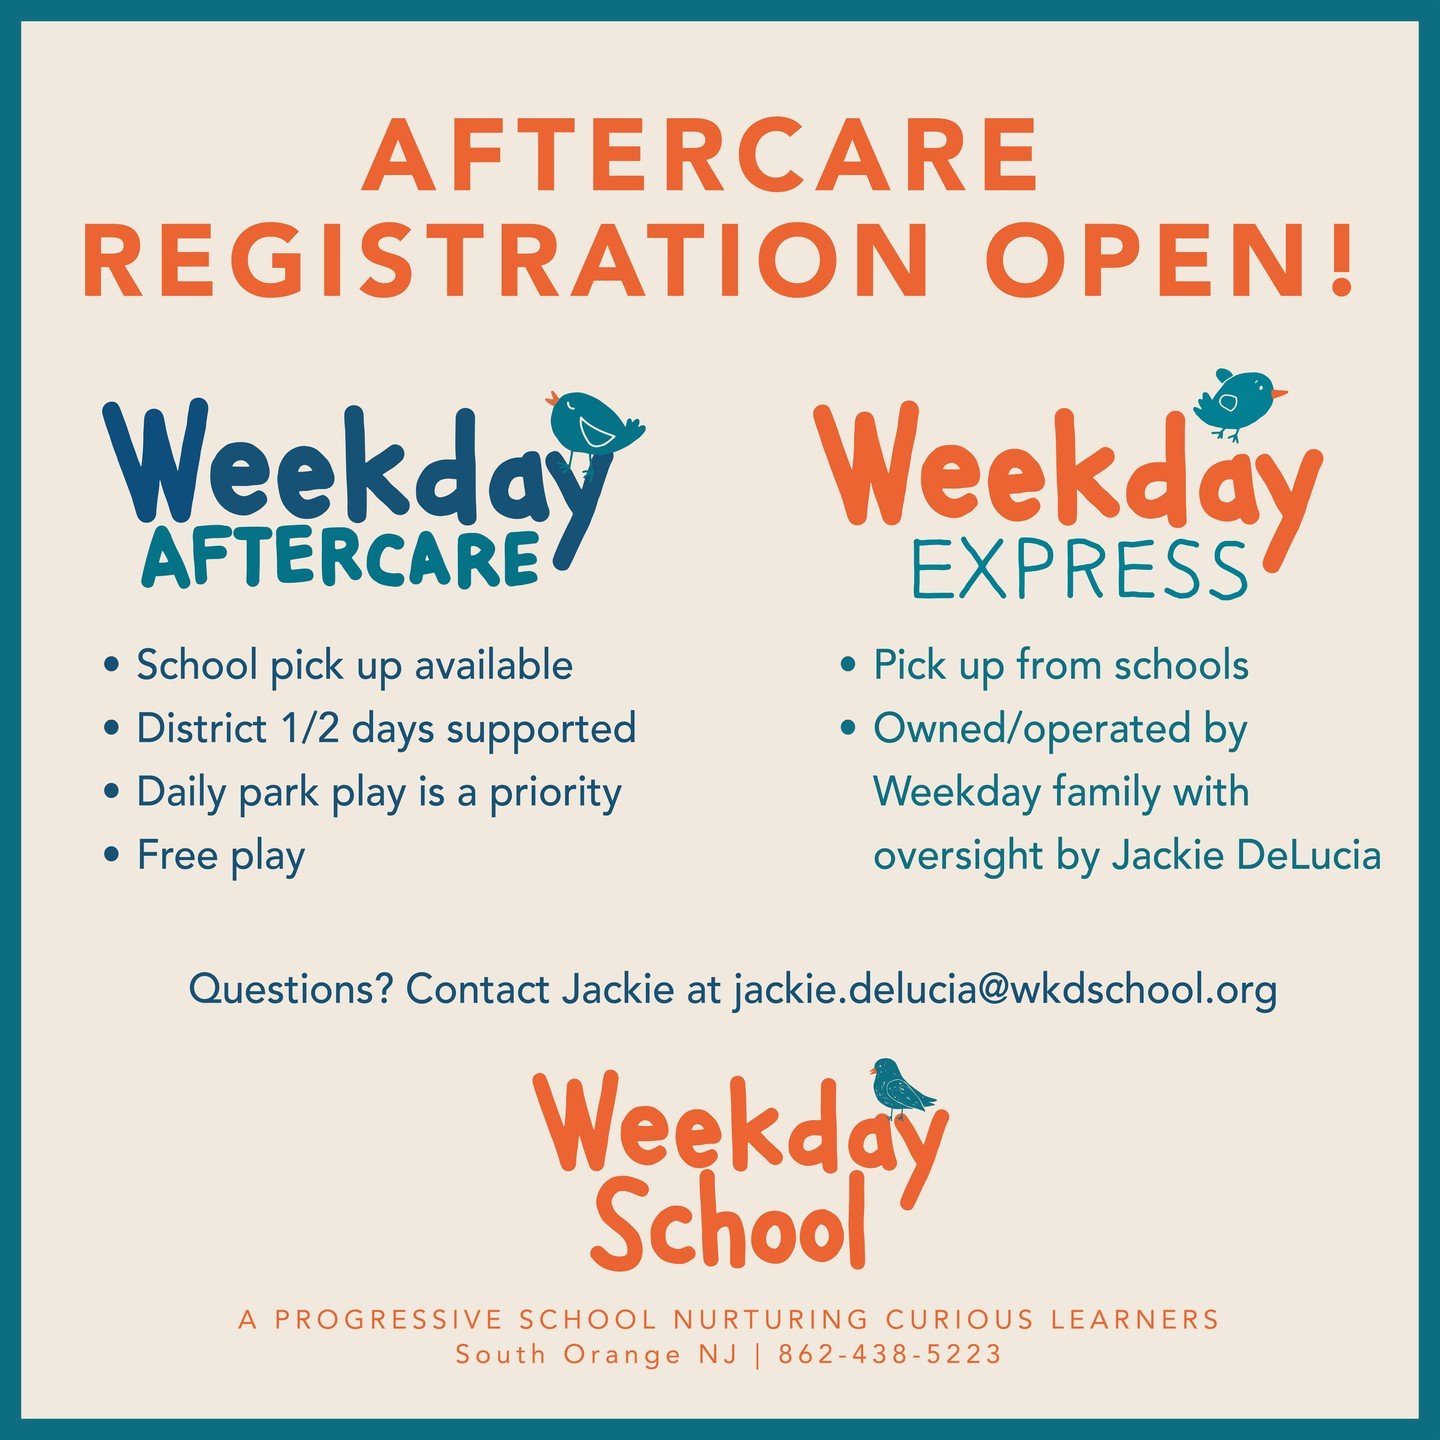 Weekday School Aftercare Registration is now OPEN.
Click the link to apply: https://mytads.com/a/weekdayschool
Choose &quot;aftercare&quot; as the grade applying for.....

Open to PreK to Grade 4

Any questions, contact Jackie at jackie.delucia@wkdsc